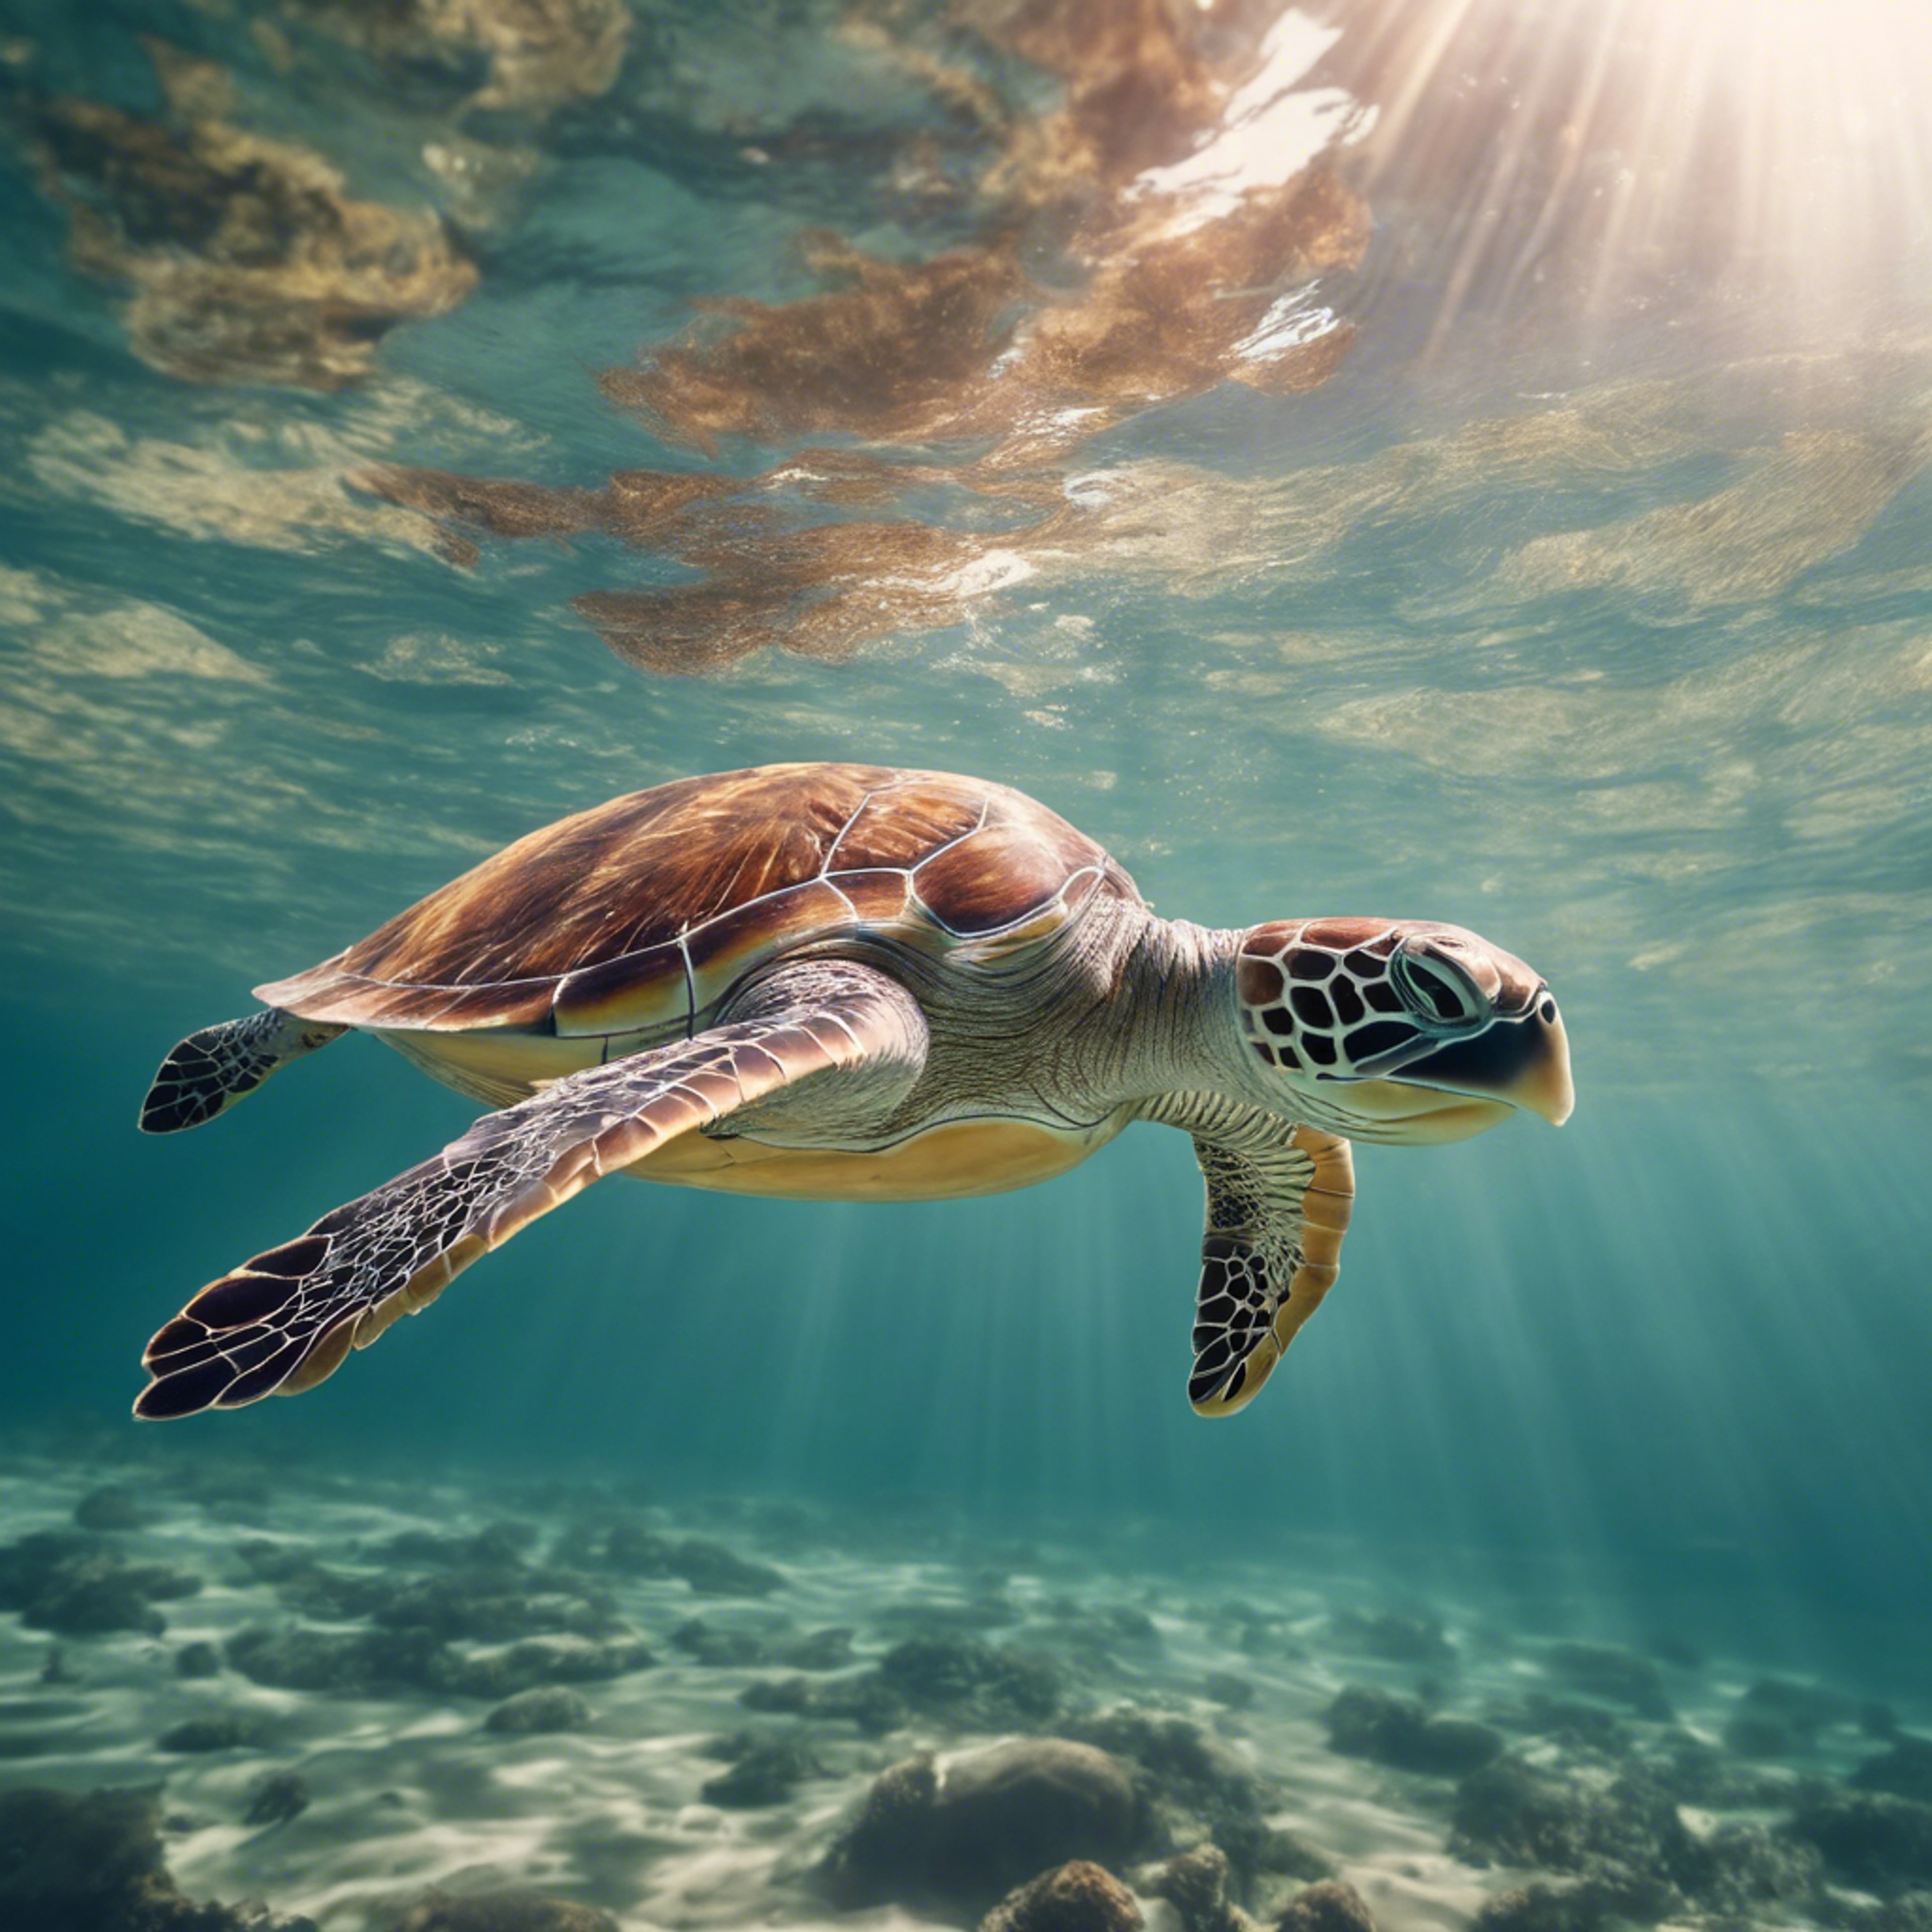 Sea turtle swimming leisurely in the ocean, with the sun penetrating the surface of the water above. วอลล์เปเปอร์[52b0564e310d4ce7b781]